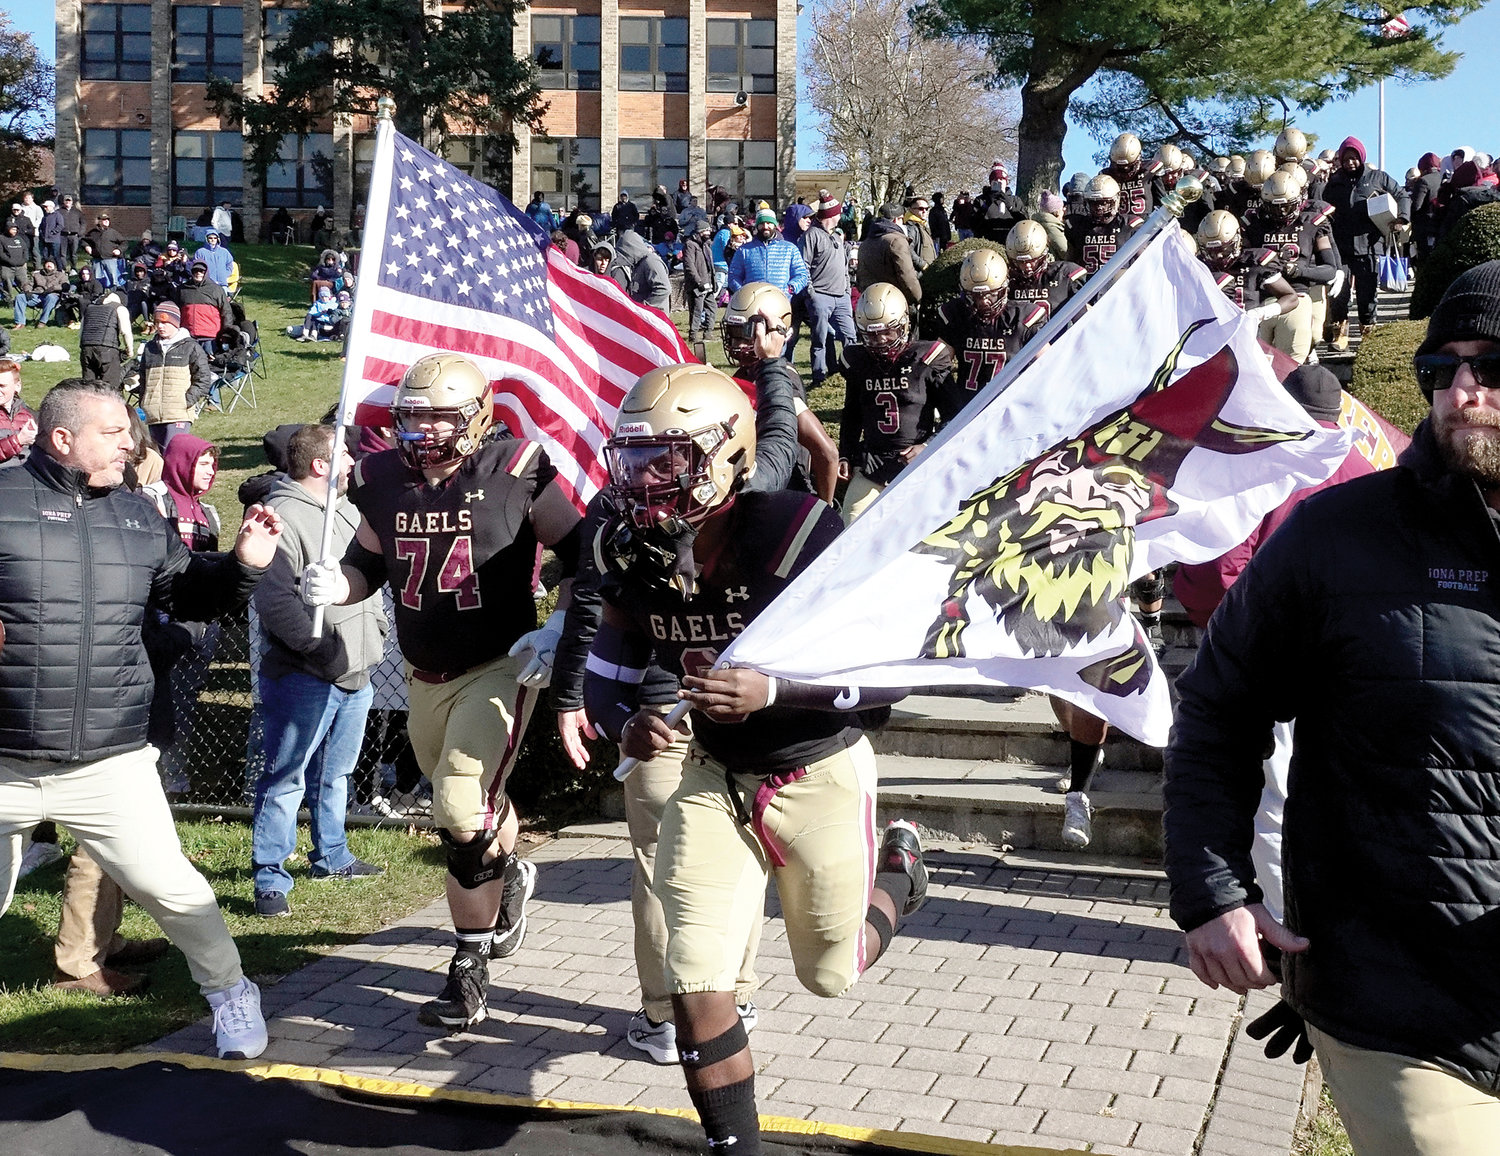 Iona Prep players run on the field Nov. 27 before the Catholic high school state championship game against St. Francis of the Buffalo region. Iona Prep won its first state title with a 38-22 victory.